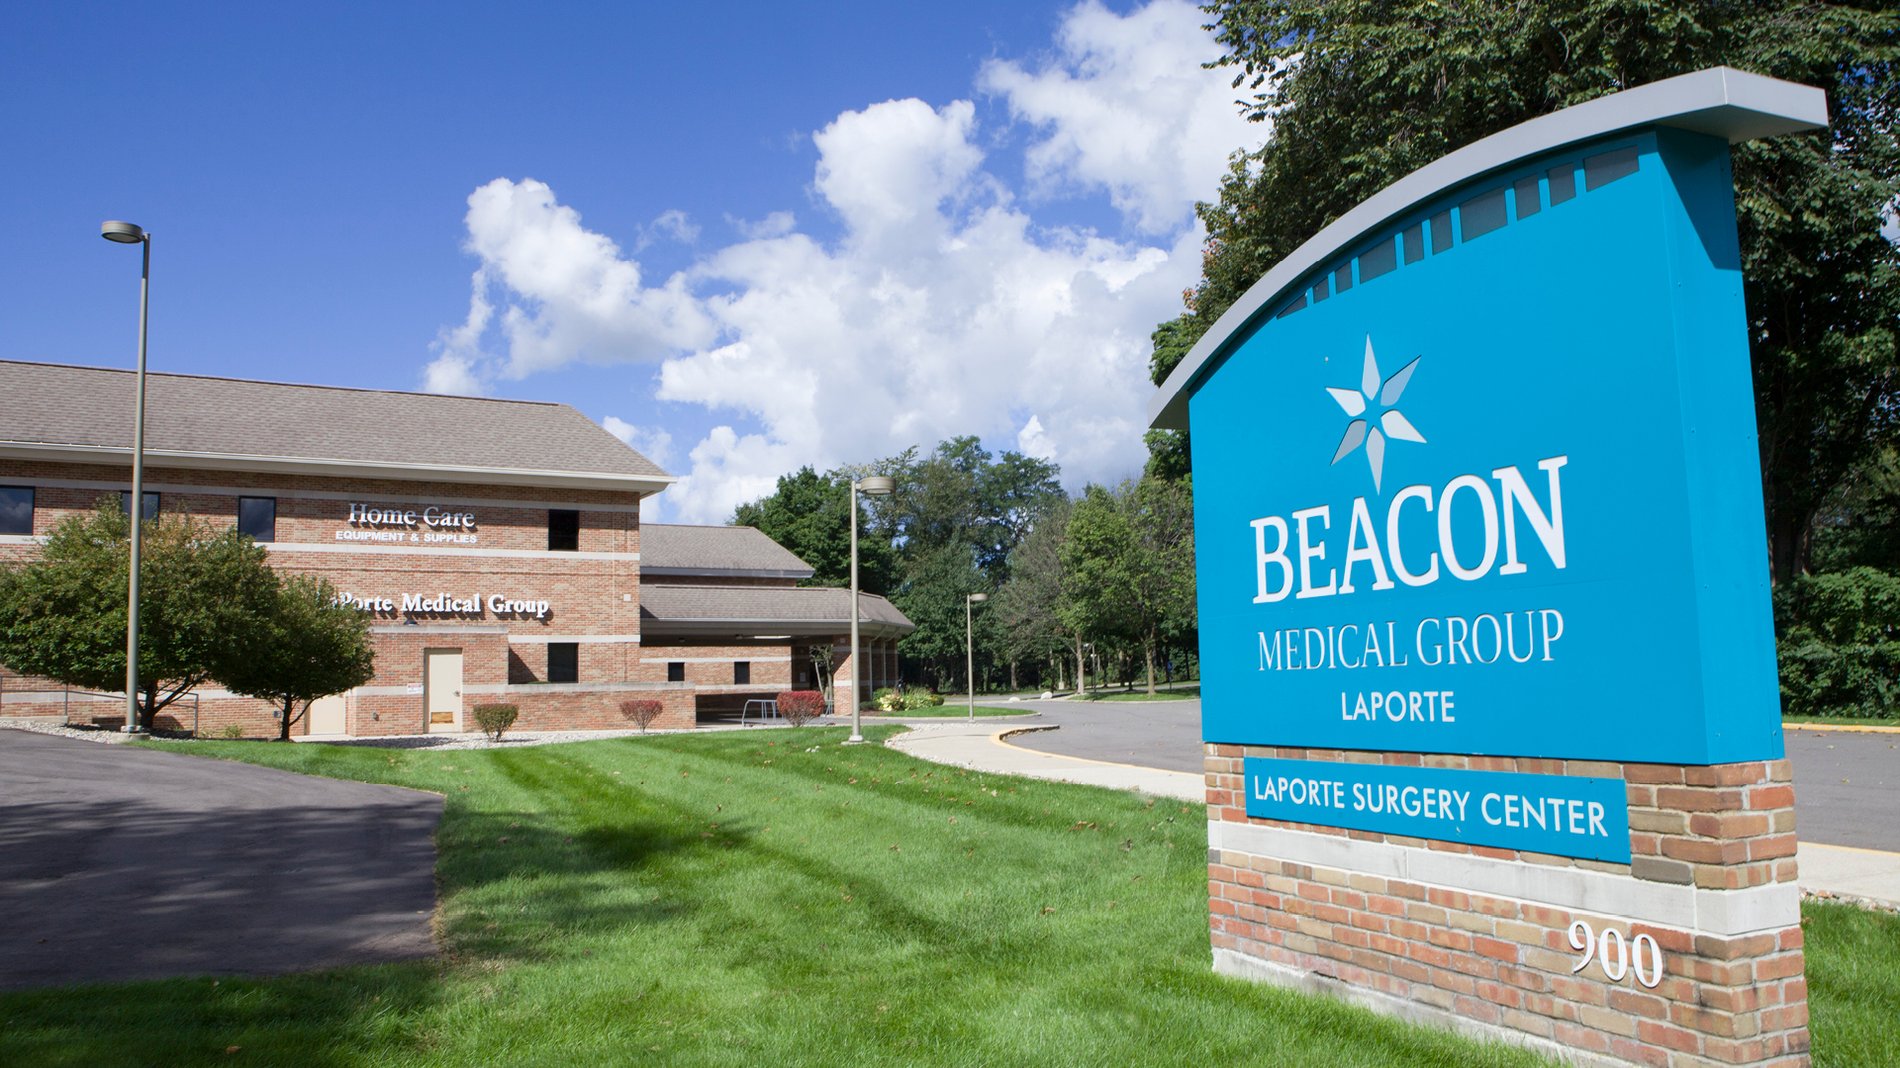 A teal sign stands in grass in front of the Beacon Medical Group LaPorte building.